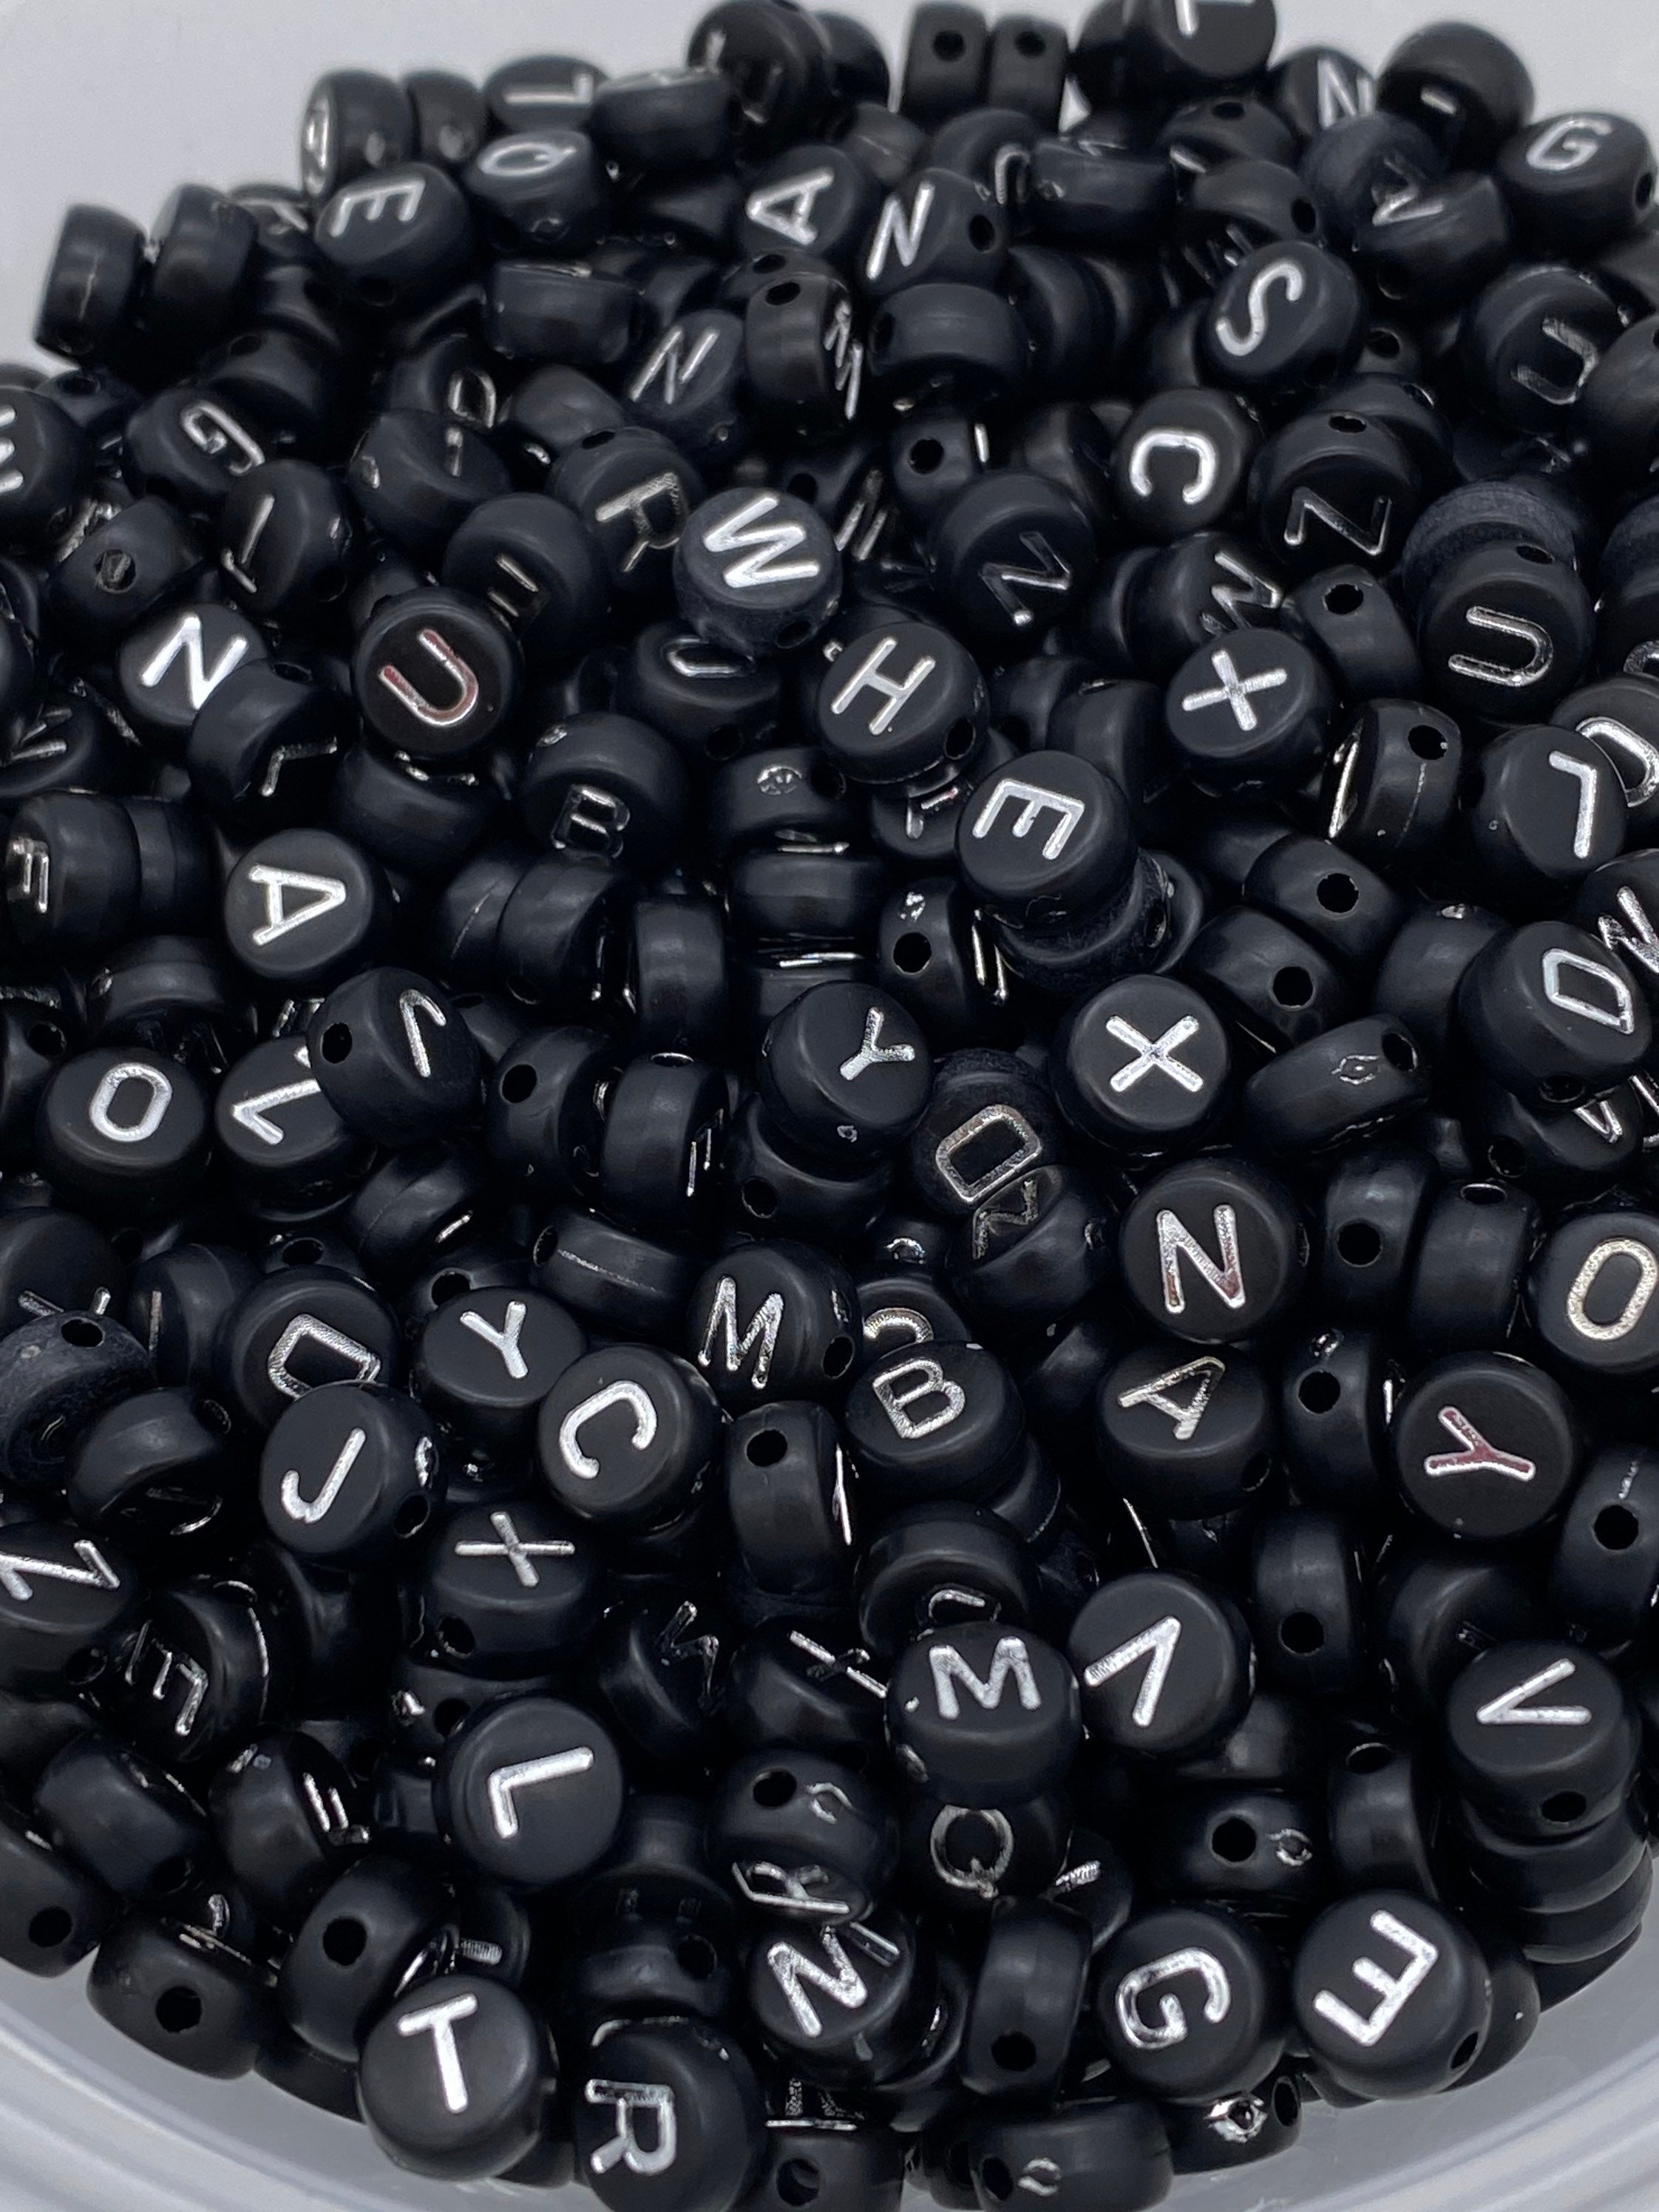 7 mm (0.28 inch) Round Acrylic Black Alphabet Beads - Black/White - Mixed  Letter Beads (50 or 100 Beads) or Separate A-Z Letters (5 Beads)